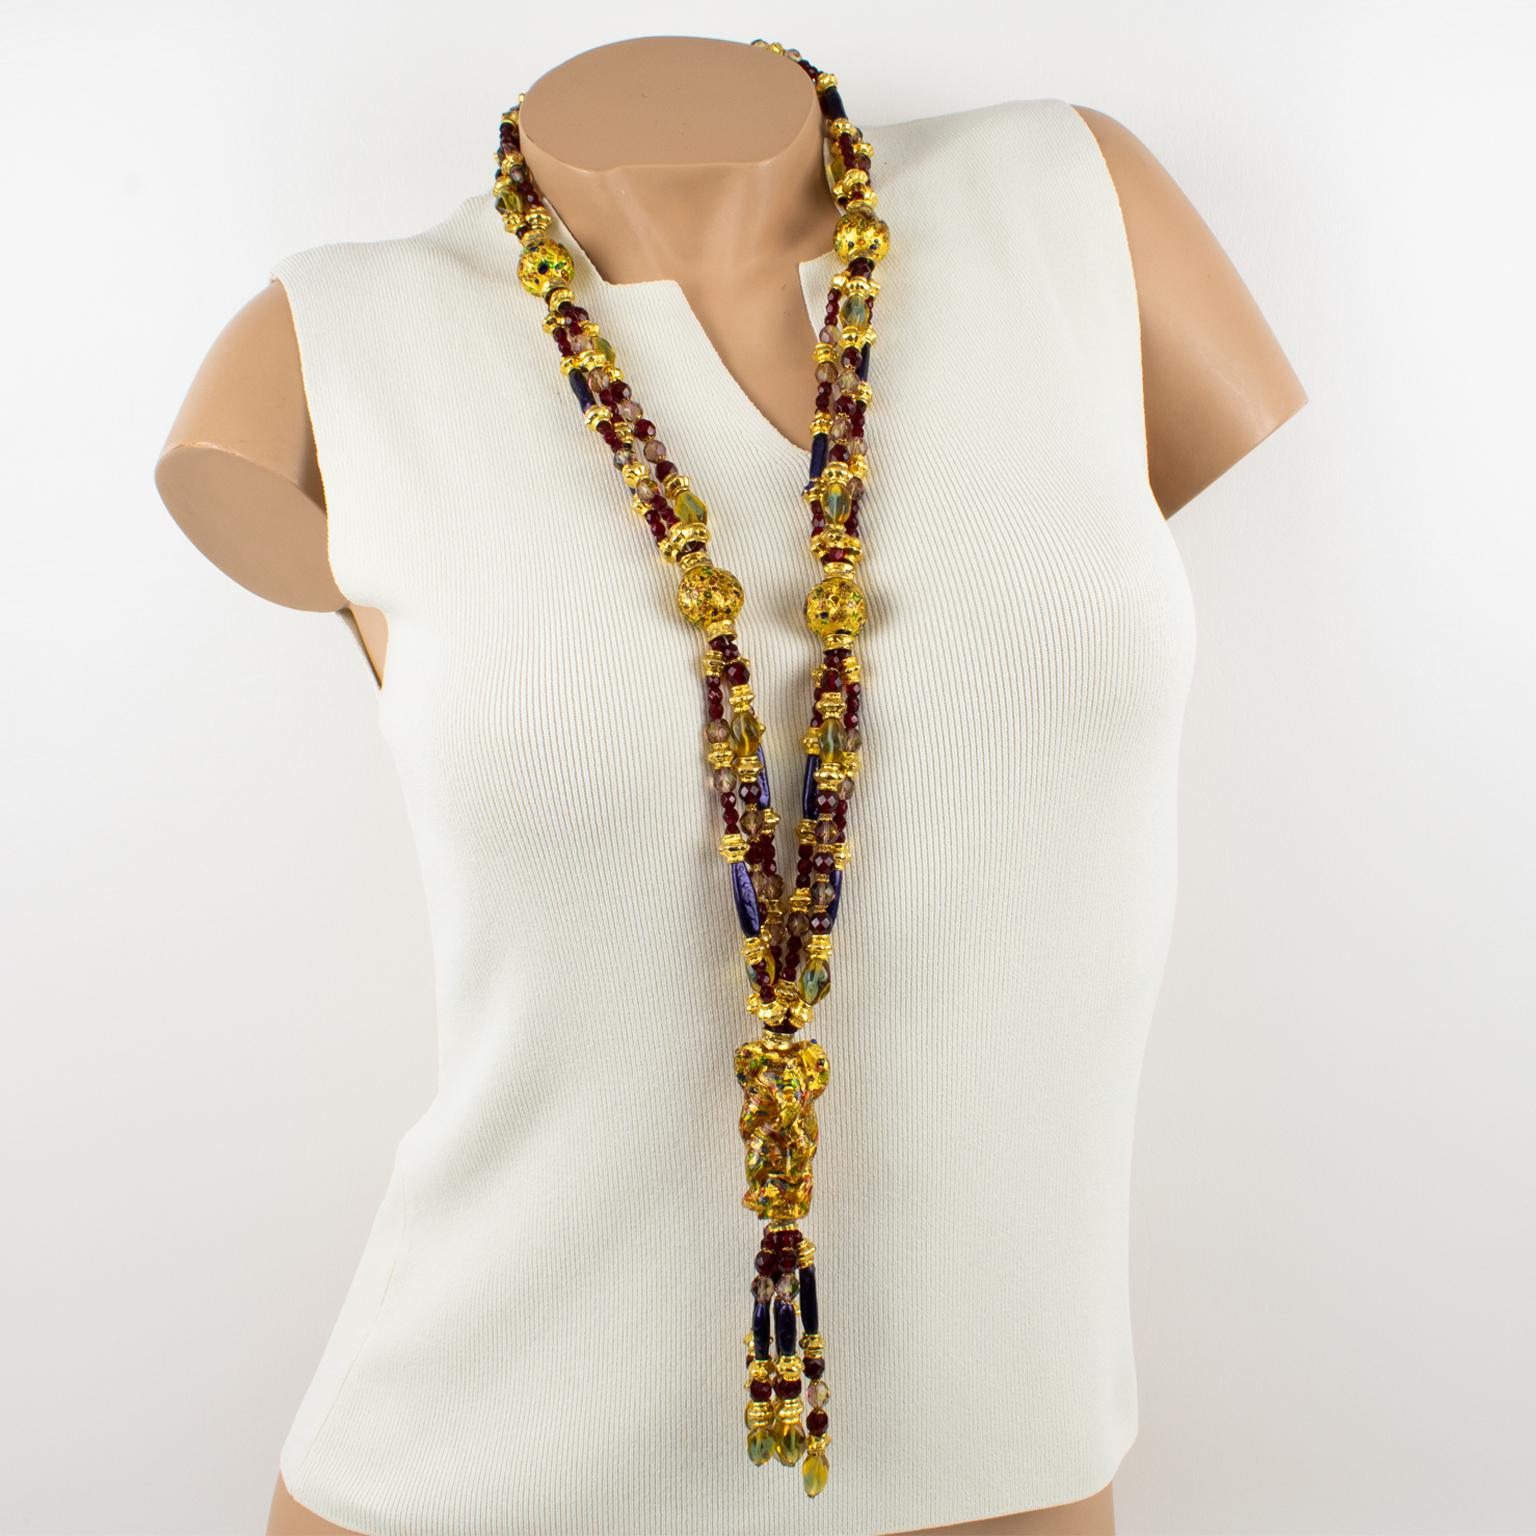 This spectacular one-of-a-kind Christian Dior runway couture necklace boasts an extra-long multi-strand shape with a dangling tassel. The piece is built with hand-blown Murano art-glass beads and complemented with gilt metal carved spacers. This